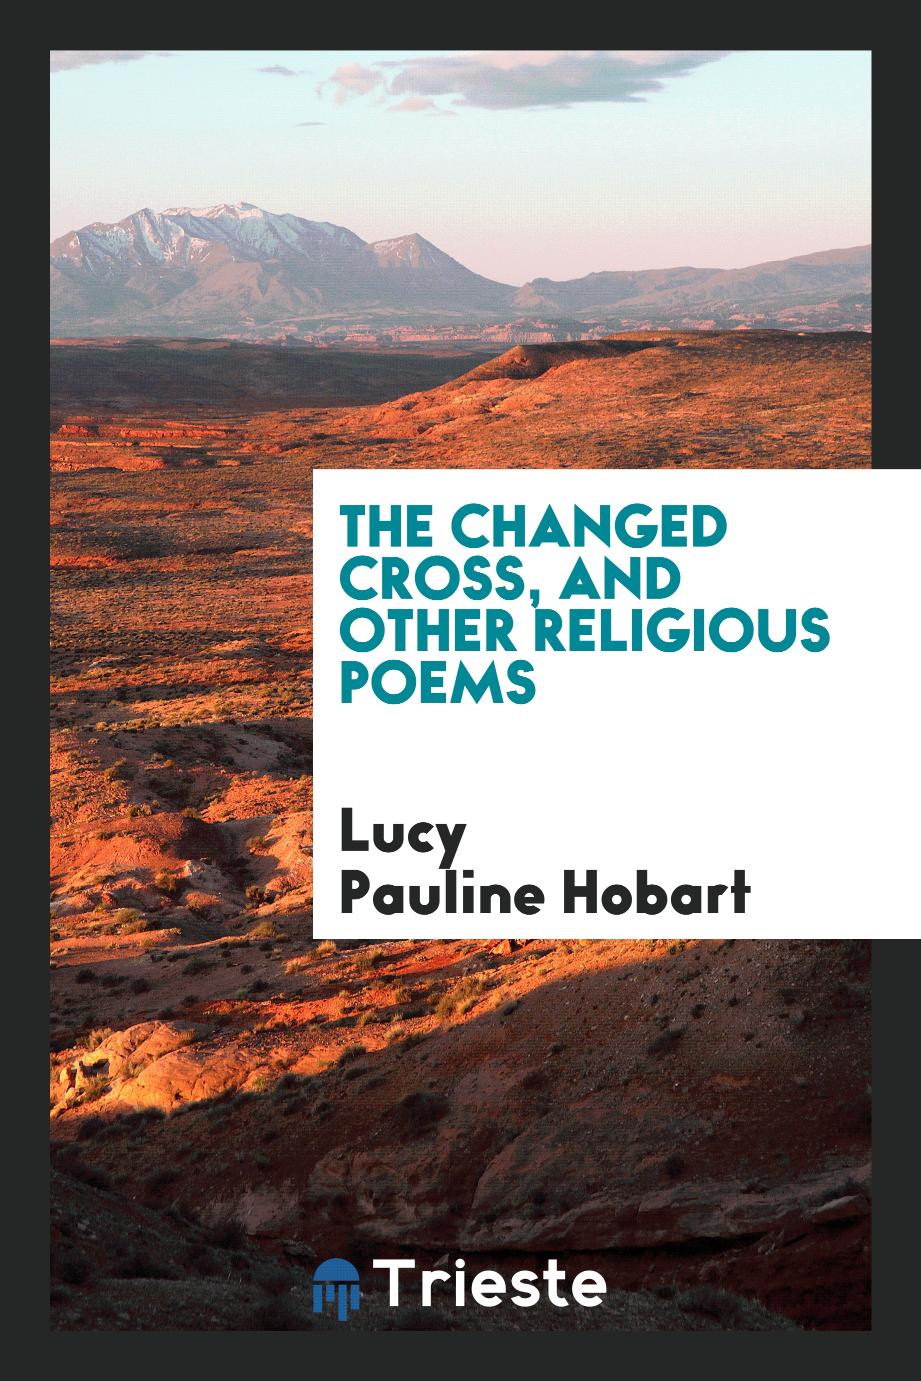 The changed cross, and other religious poems